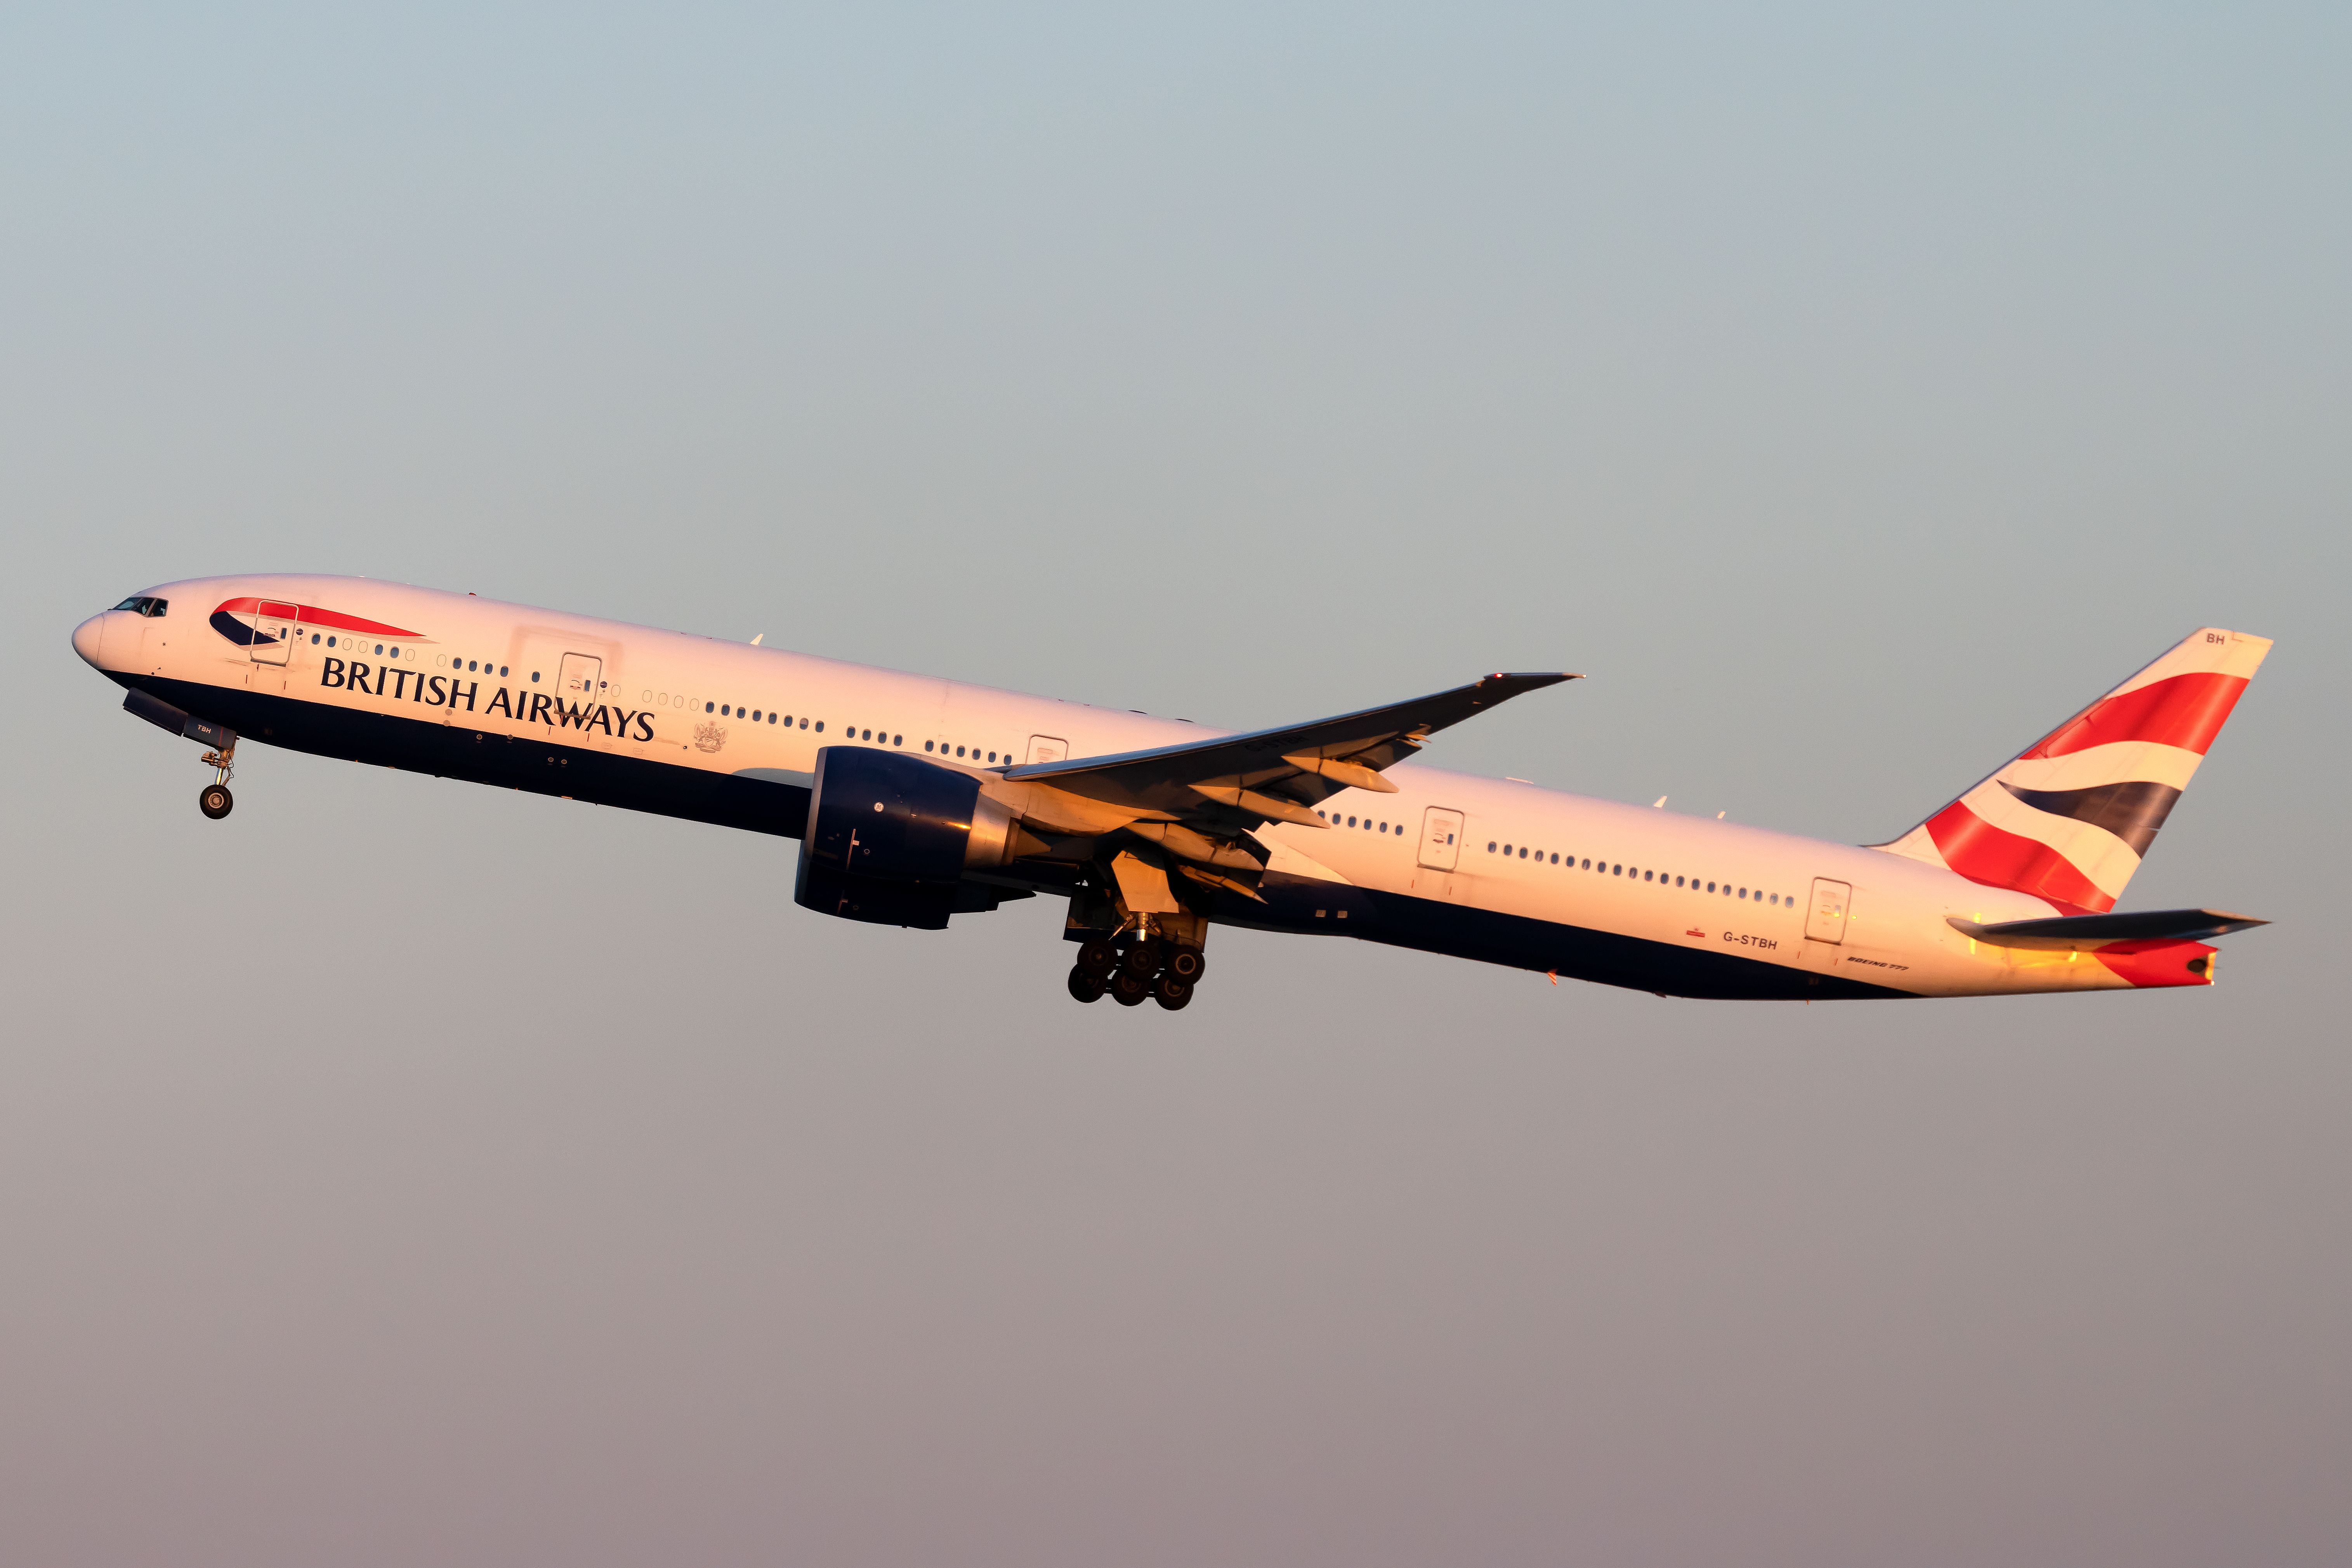 A British Airways Boeing 777-300 flying. In the background a slightly pink sky can be seen. 